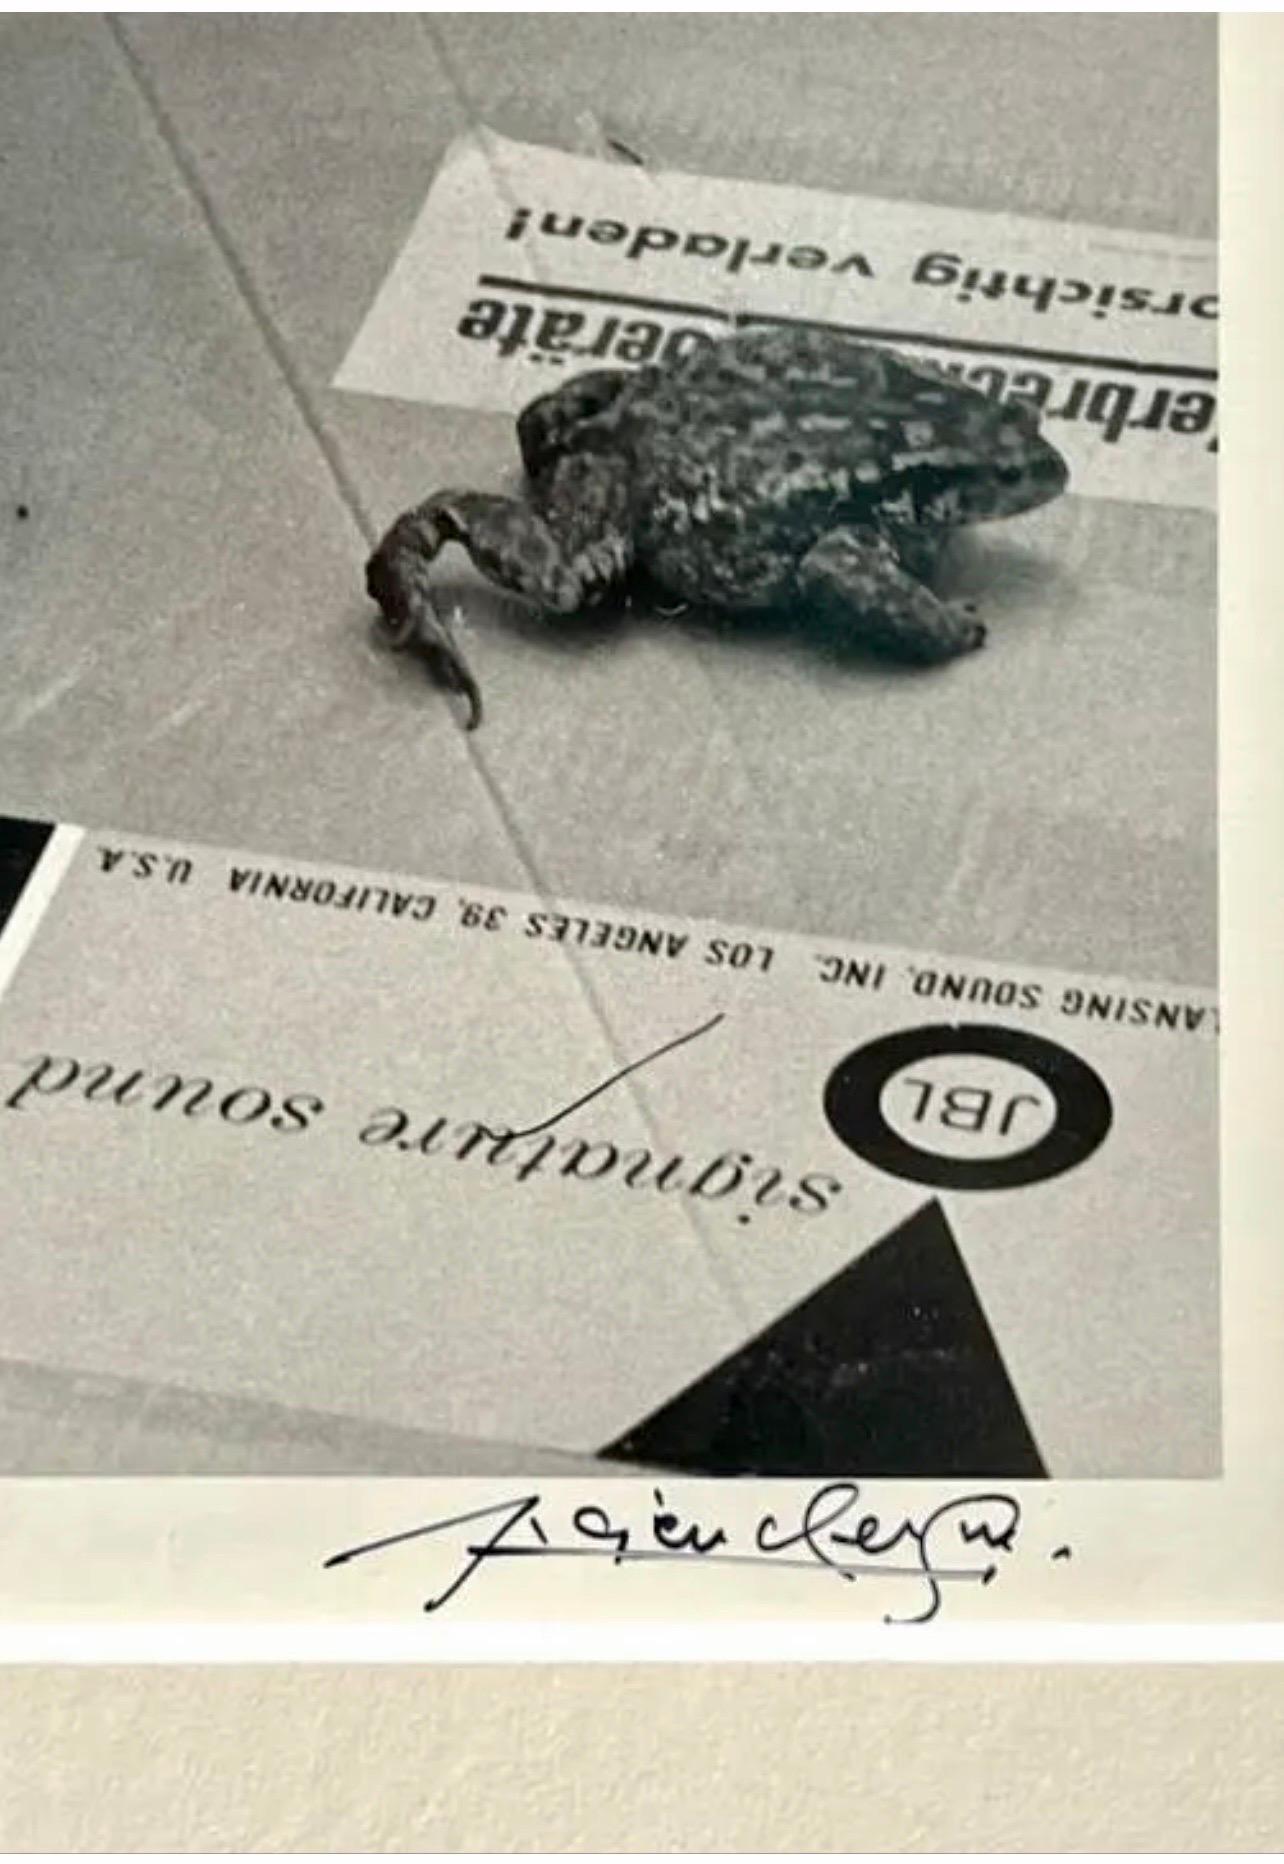 Lucien Clergue (FRENCH, 1934 - 2014) 
Gelatin silver photographic print depicting Pablo Picasso with a frog or turtle.
Mougins, 1968
Hand signed by the artist with hand written description. Titled and dated lower left. 
Mounted in a silver painted